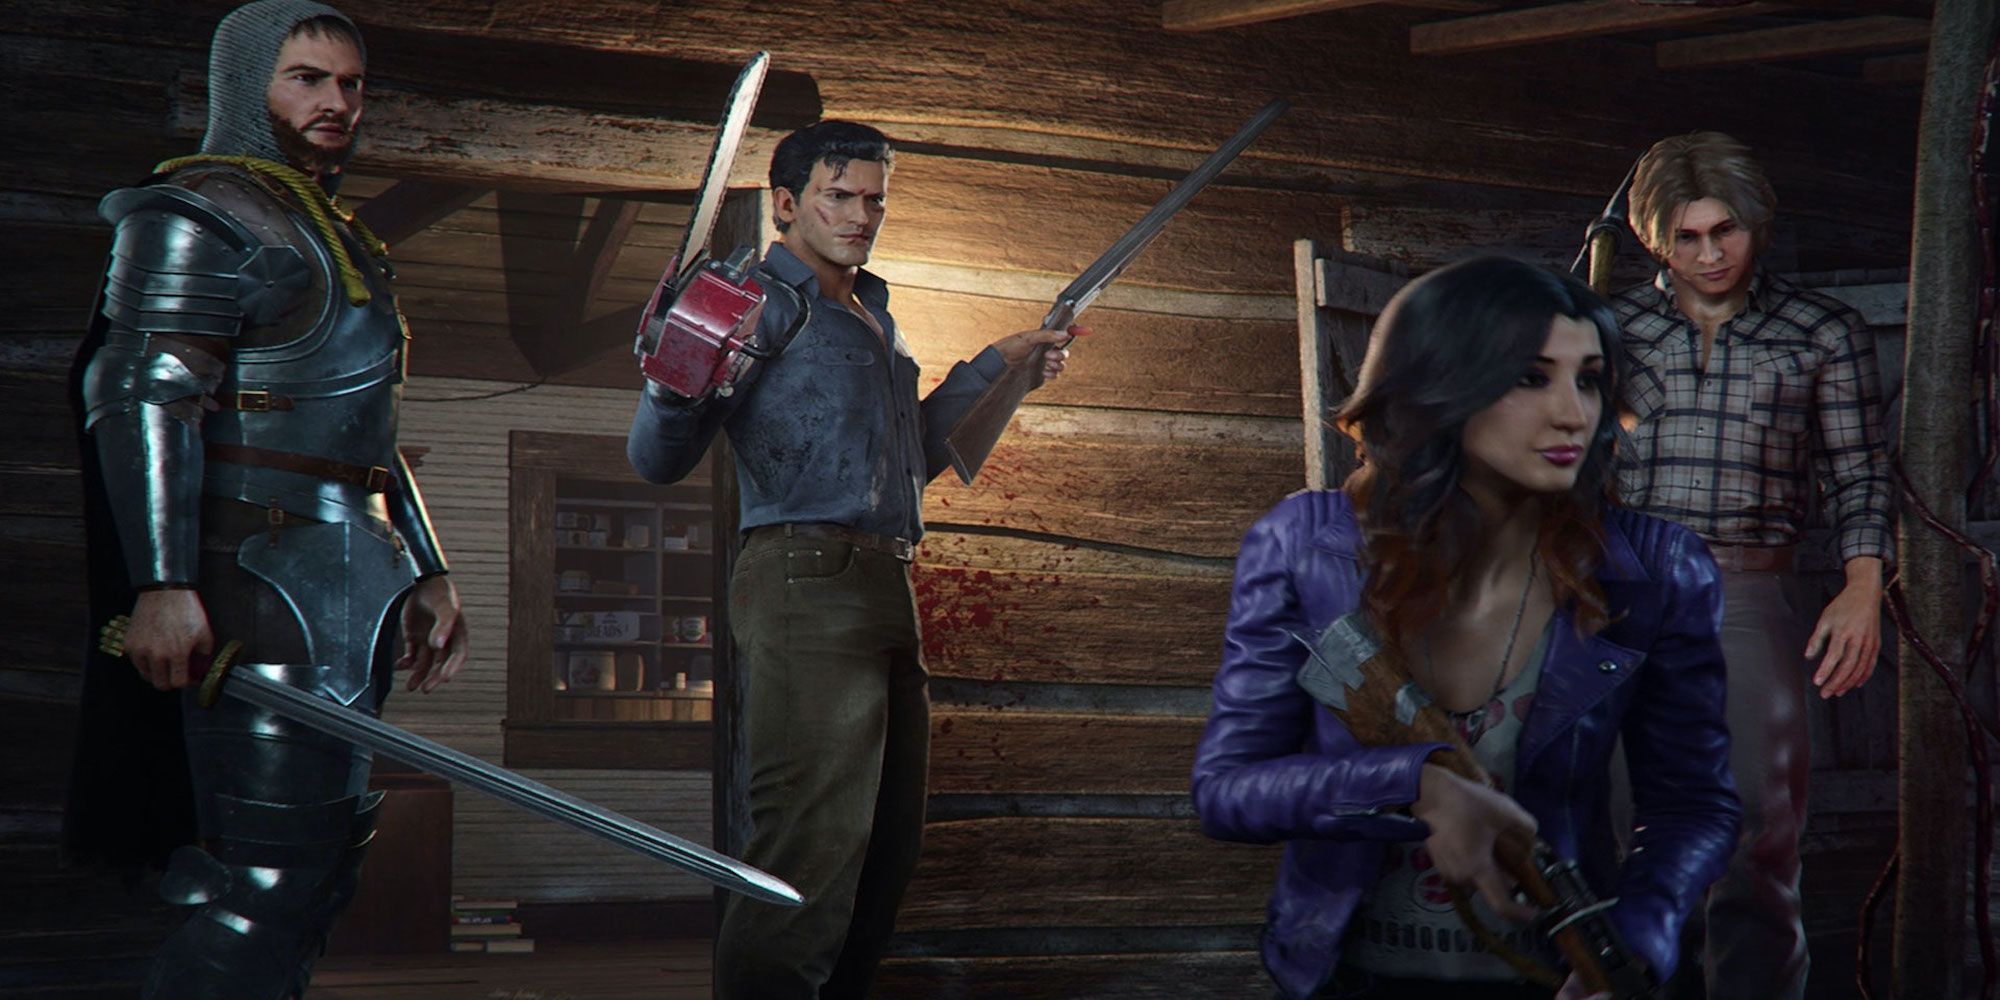 Cast of characters from Evil Dead: The Game